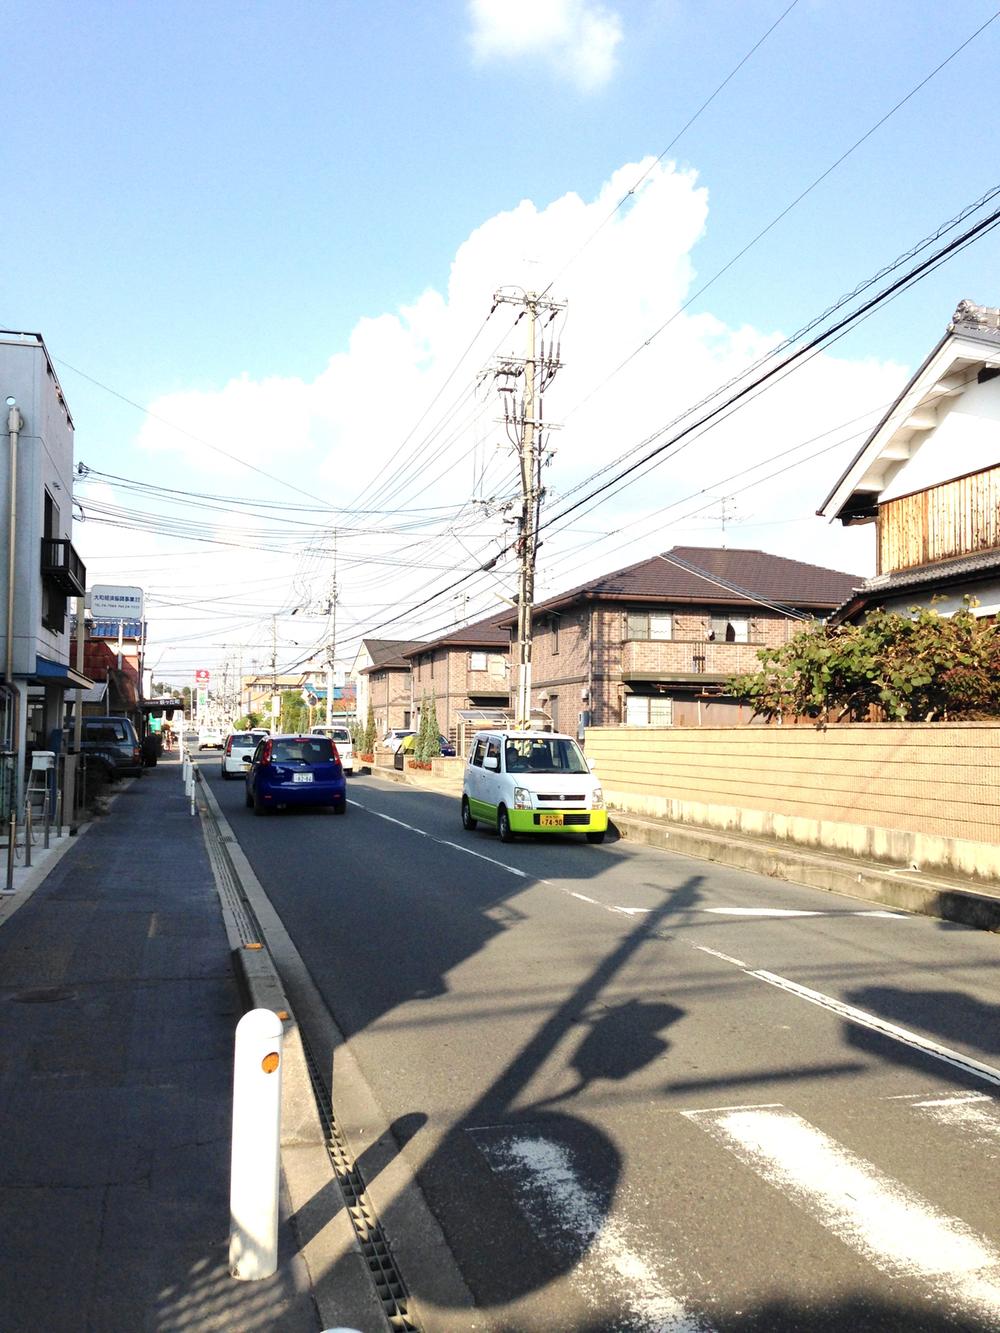 Local photos, including front road. Minamikidera north-south road north